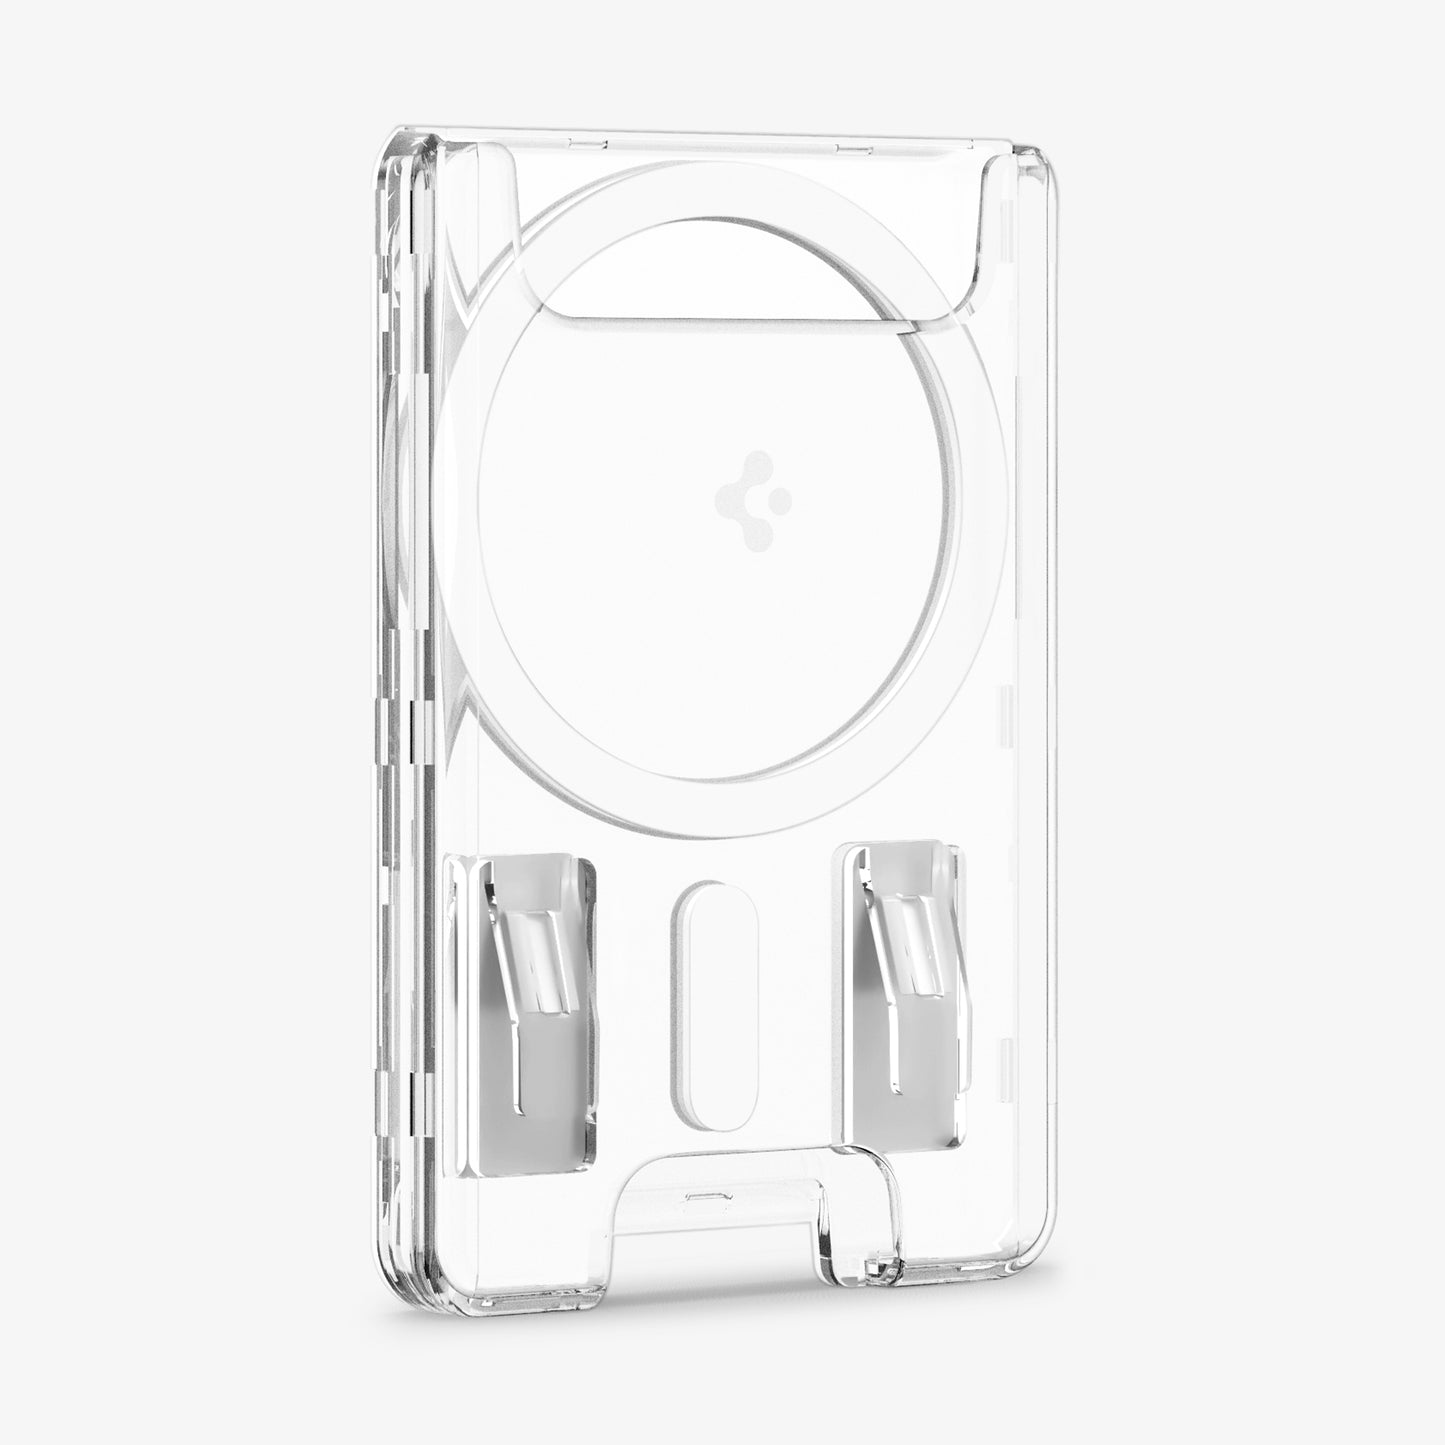 AFA07148 - Ultra Hybrid MagFit Wallet (MagFit) in Crystal Clear showing the front, partial side without cards inside